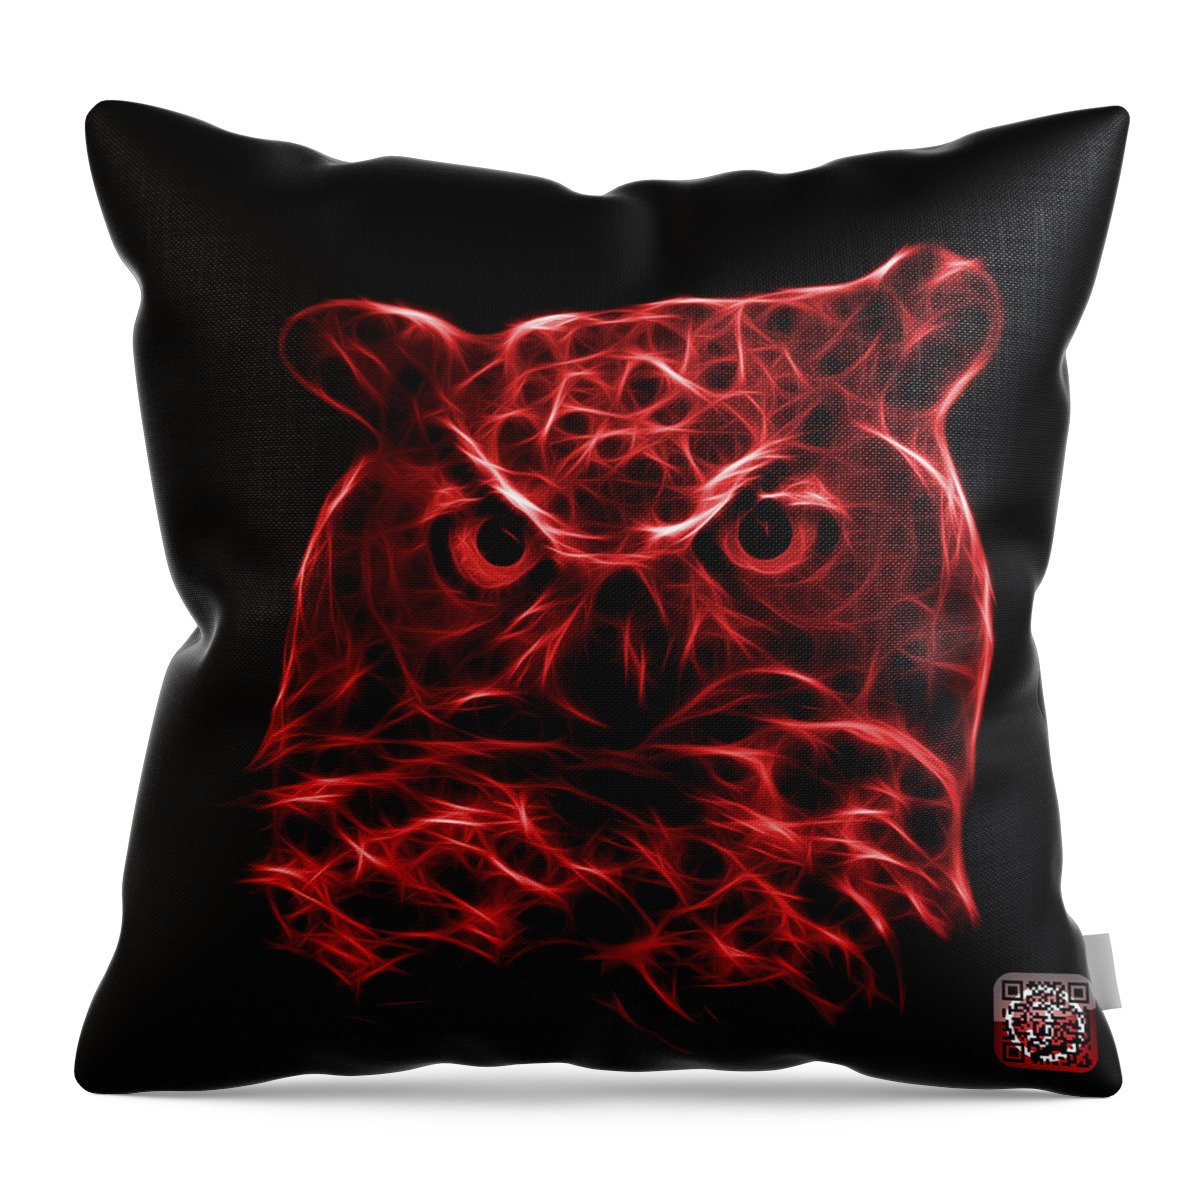 Owl Throw Pillow featuring the digital art Red Owl 4436 - F M by James Ahn